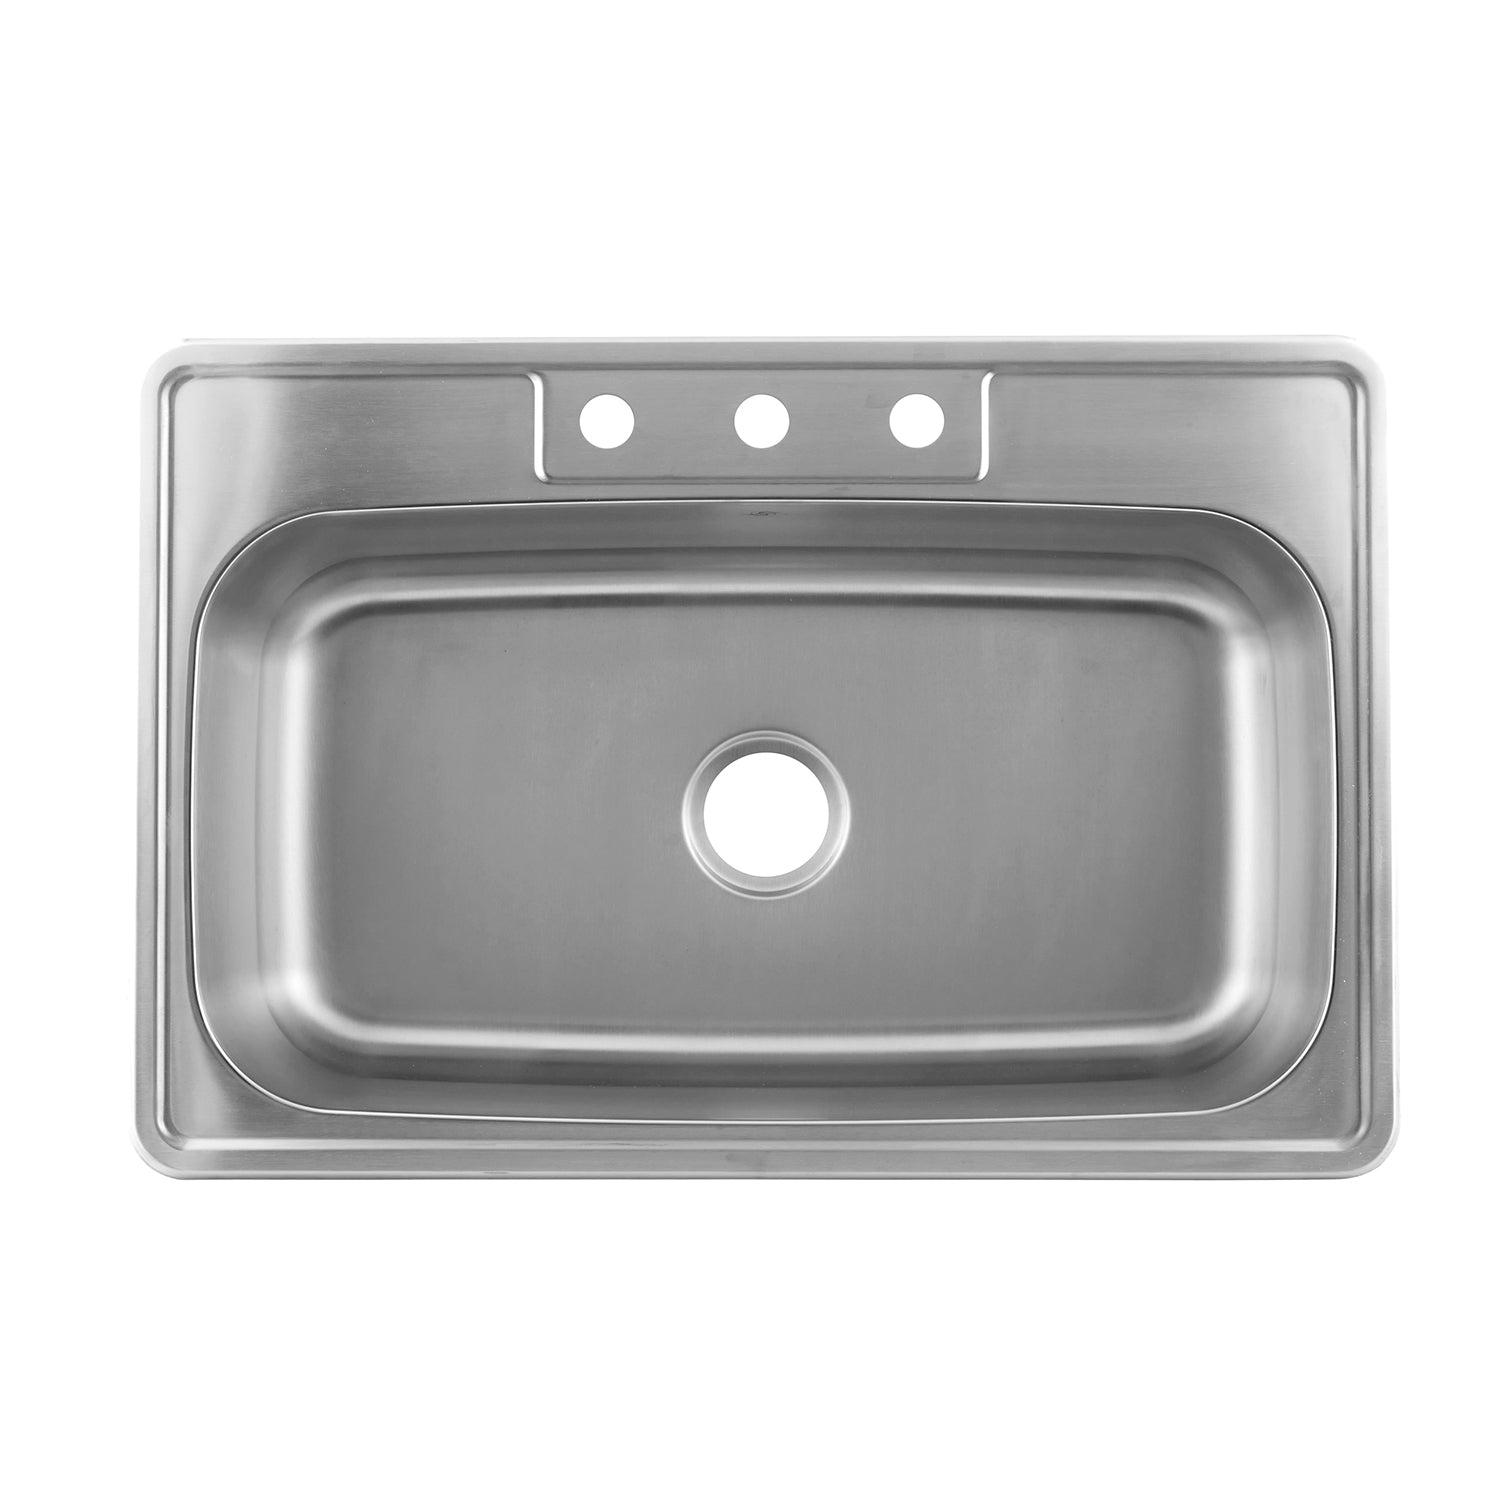 DAX  Single Bowl Top Mount Kitchen Sink, 20 Gauge Stainless Steel, Brushed Finish , 33 x 22 x 8-5/8 Inches (DAX-OM-3323)